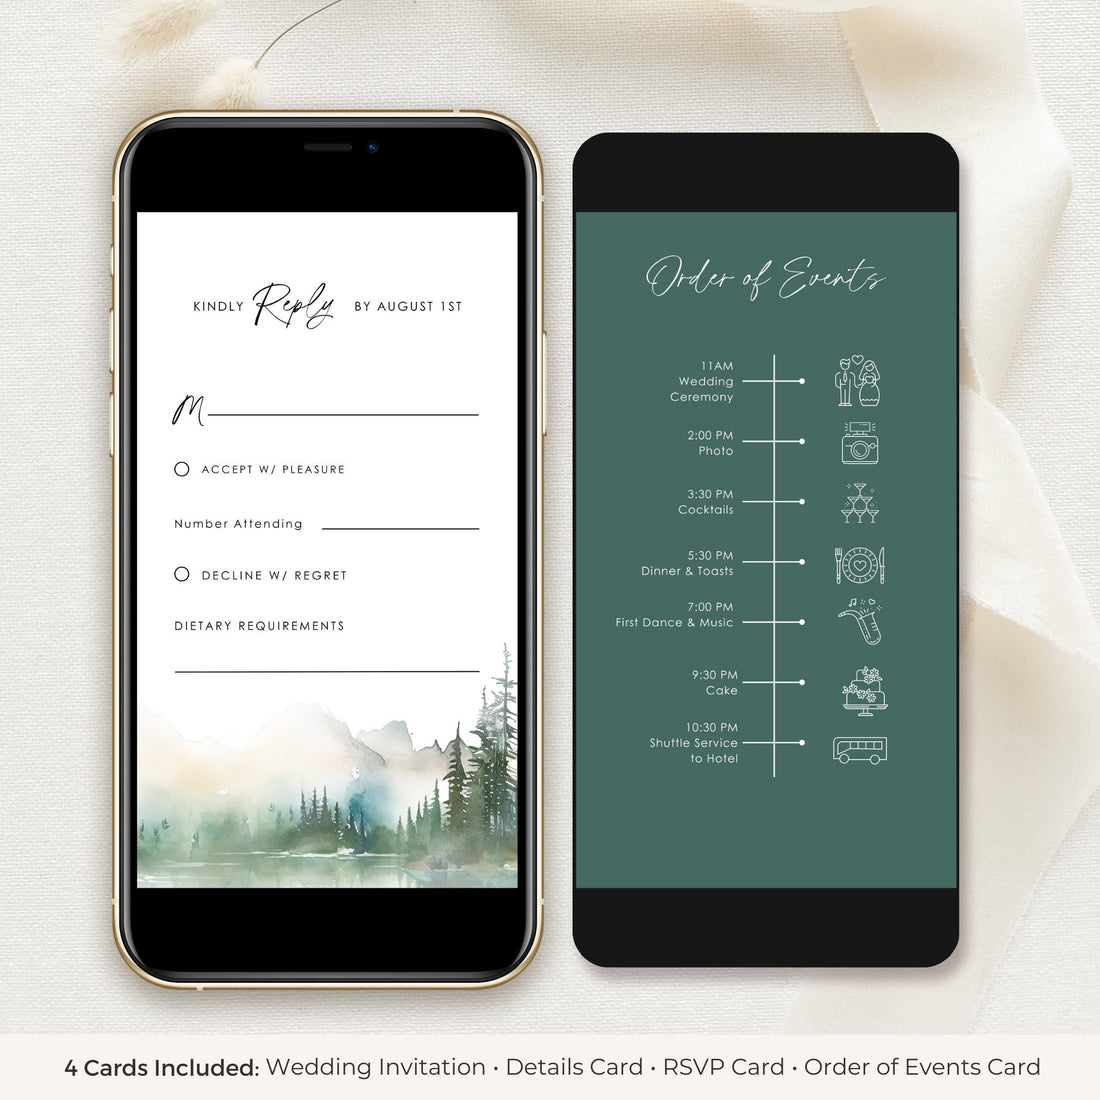 ARNA Digital Card for Wedding with Mountains